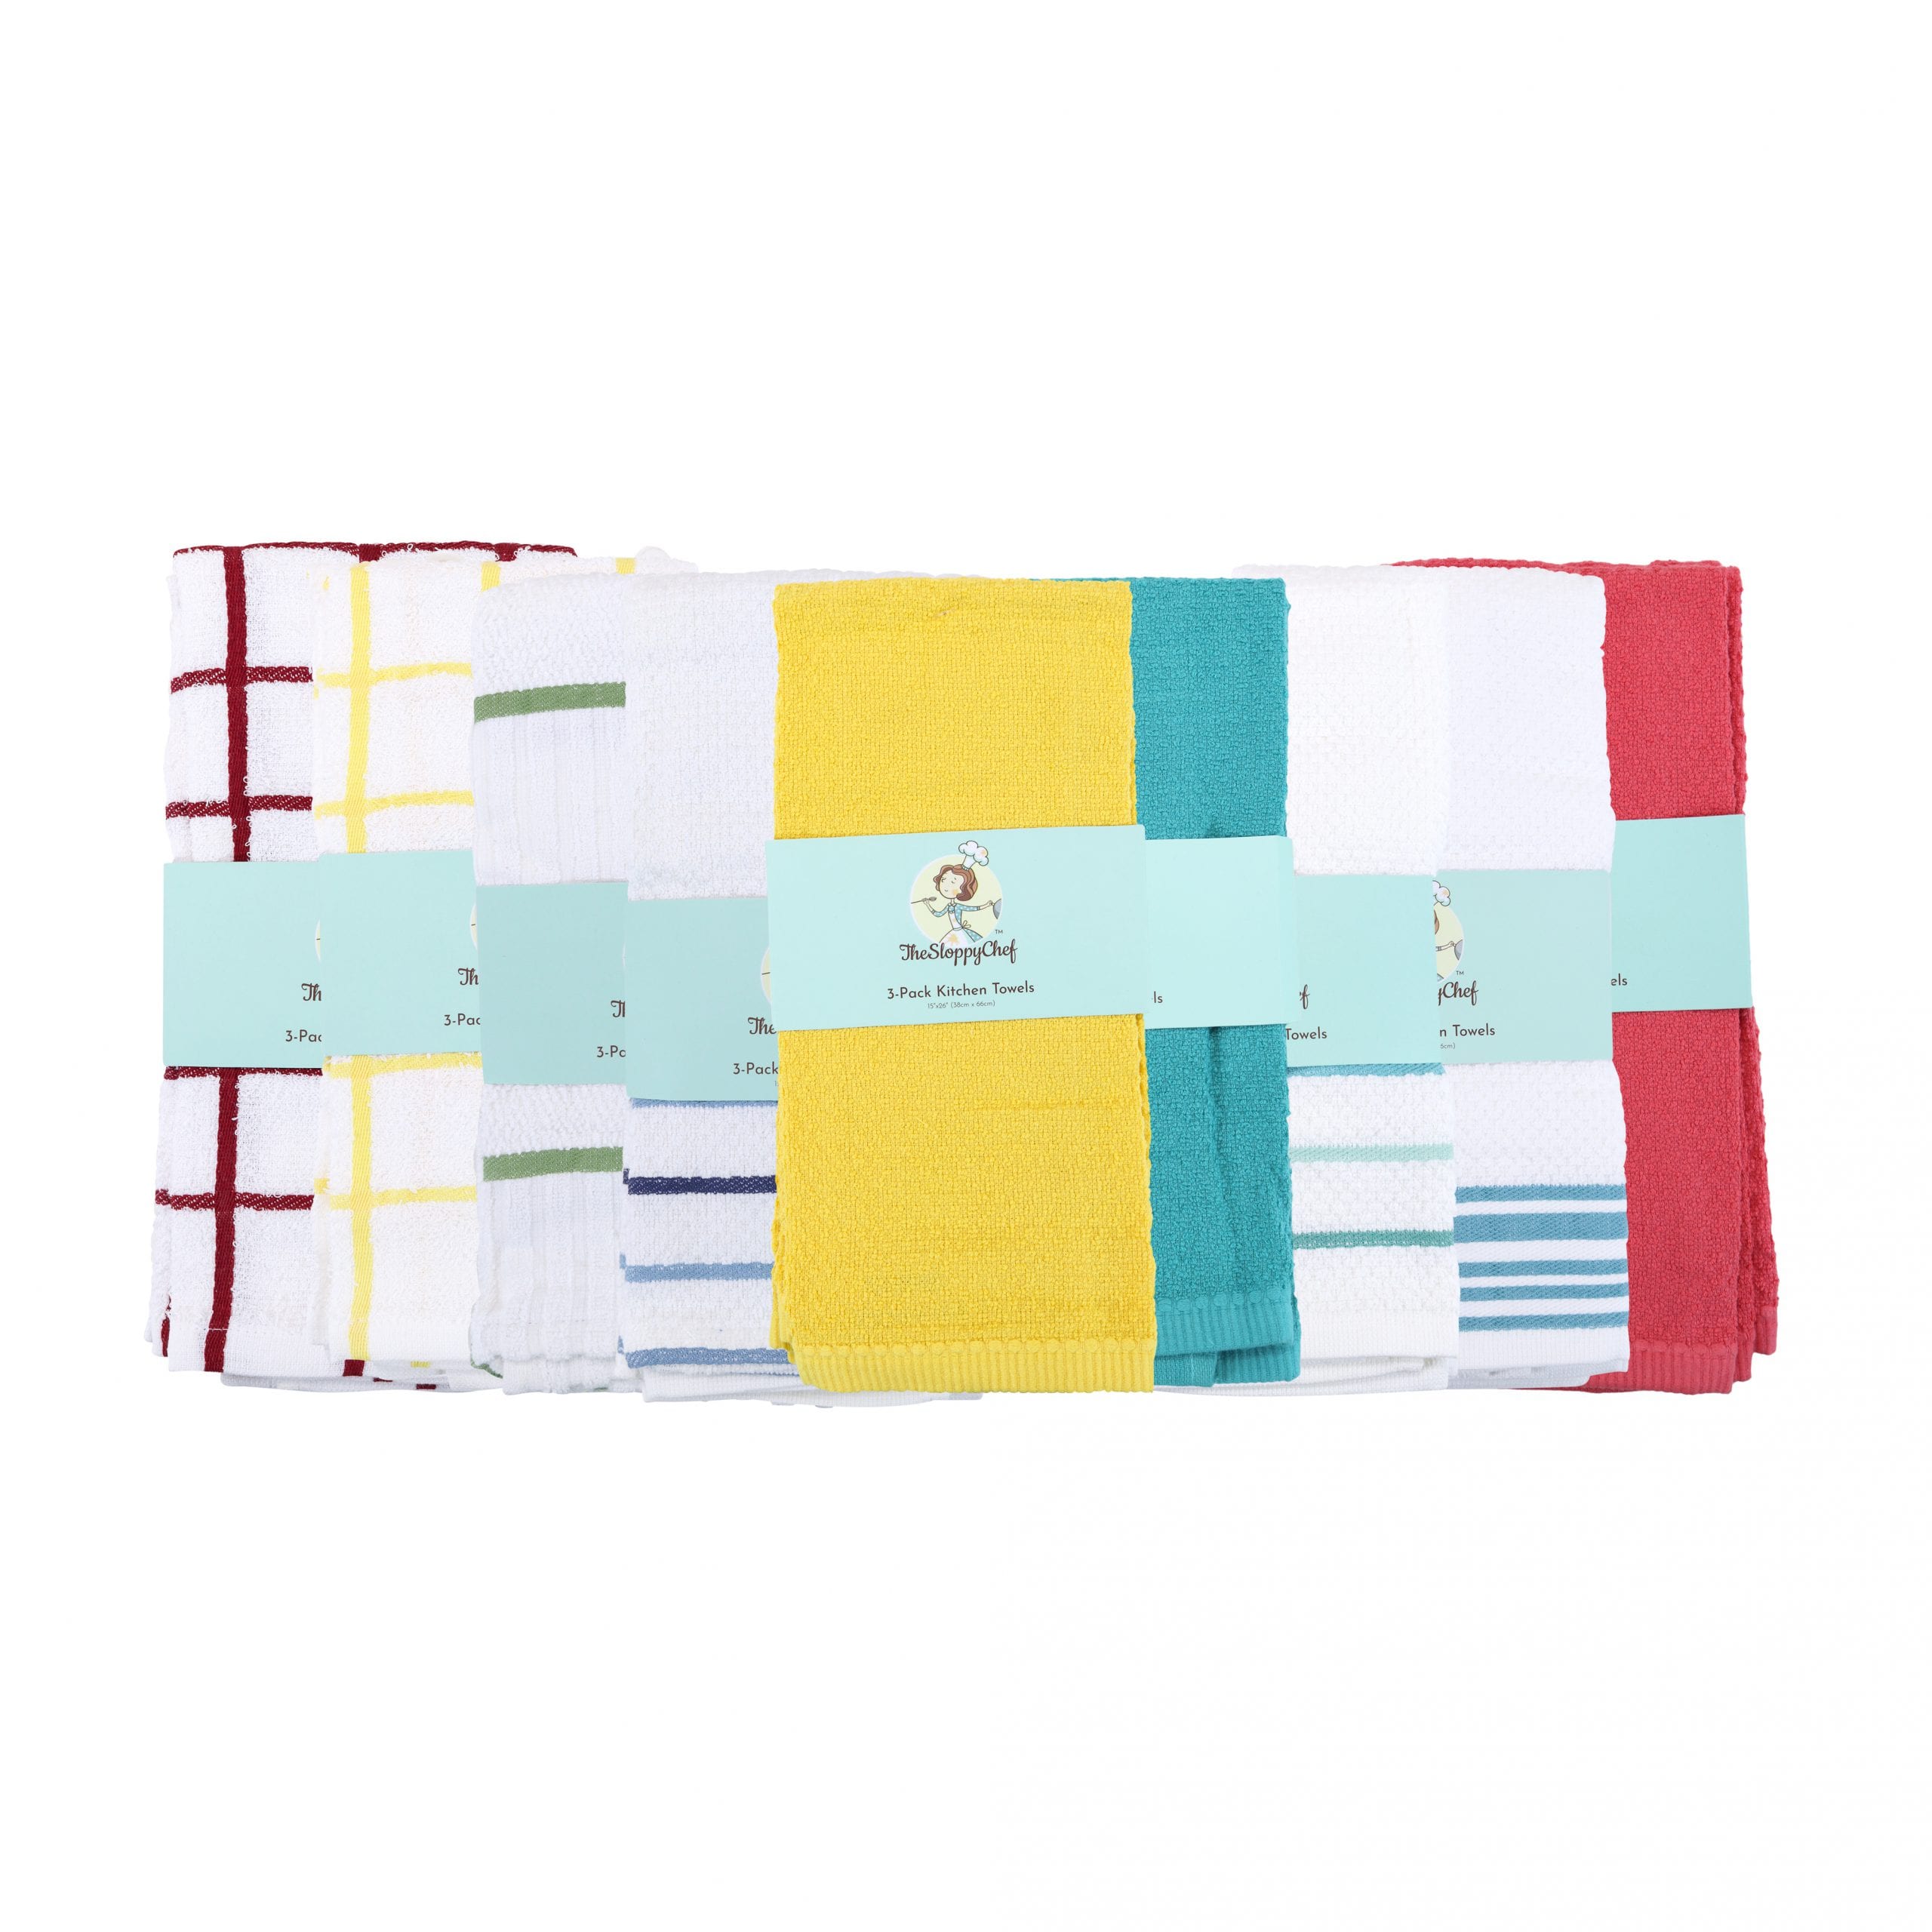 Matching Terry Kitchen Towels, Wholesale Kitchen Towels